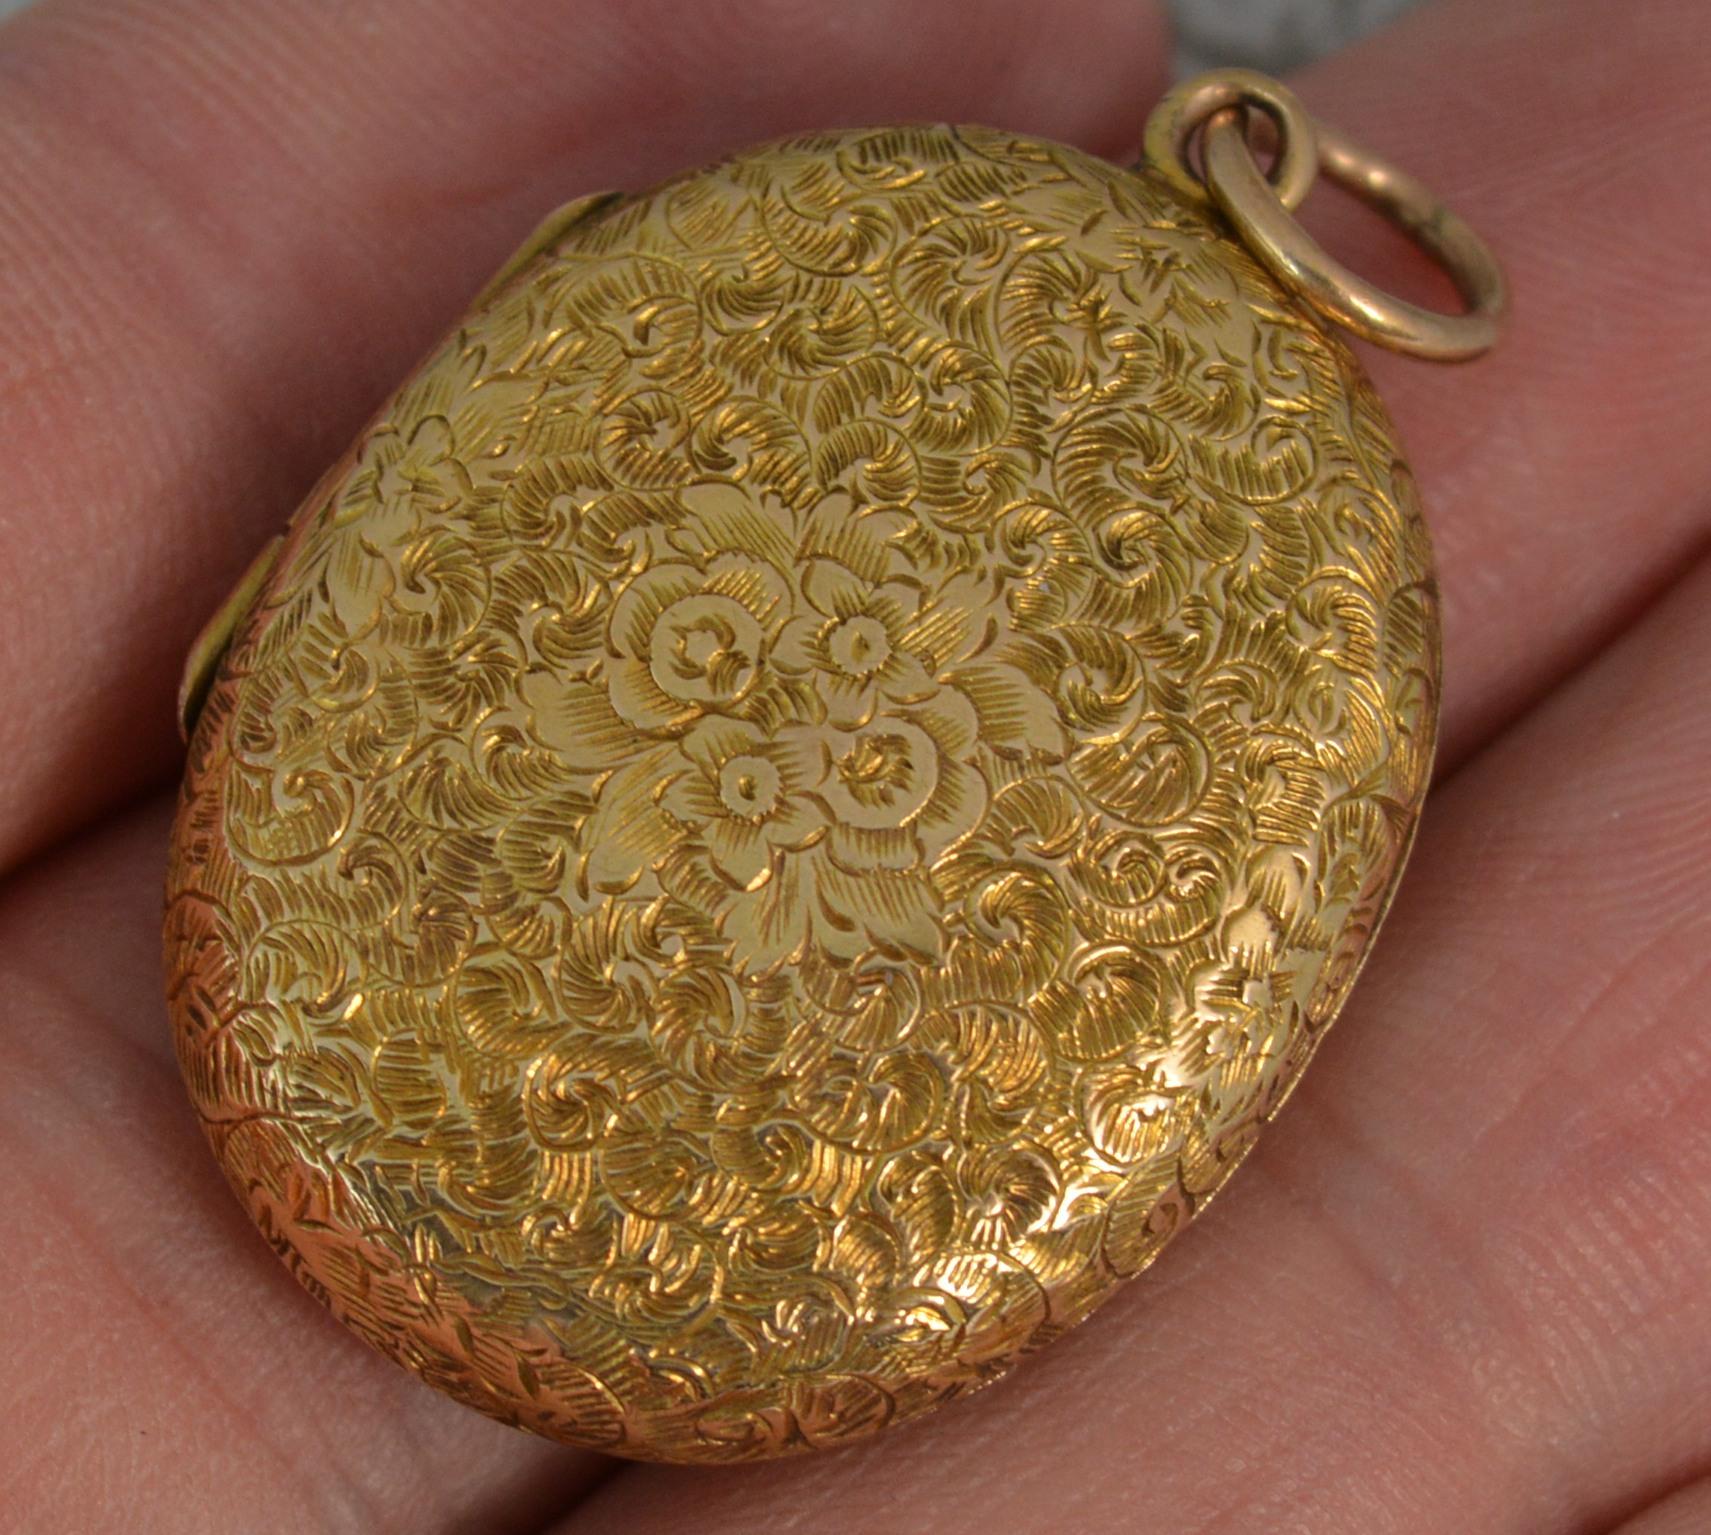 A true Victorian period pendant locket c1880.
Solid 15 carat yellow gold example.
Designed with very fine hand engraved floral pattern to each side and blank cartouche to the centre. 
Suitable for four photographs.

CONDITION ; Excellent. Very crisp